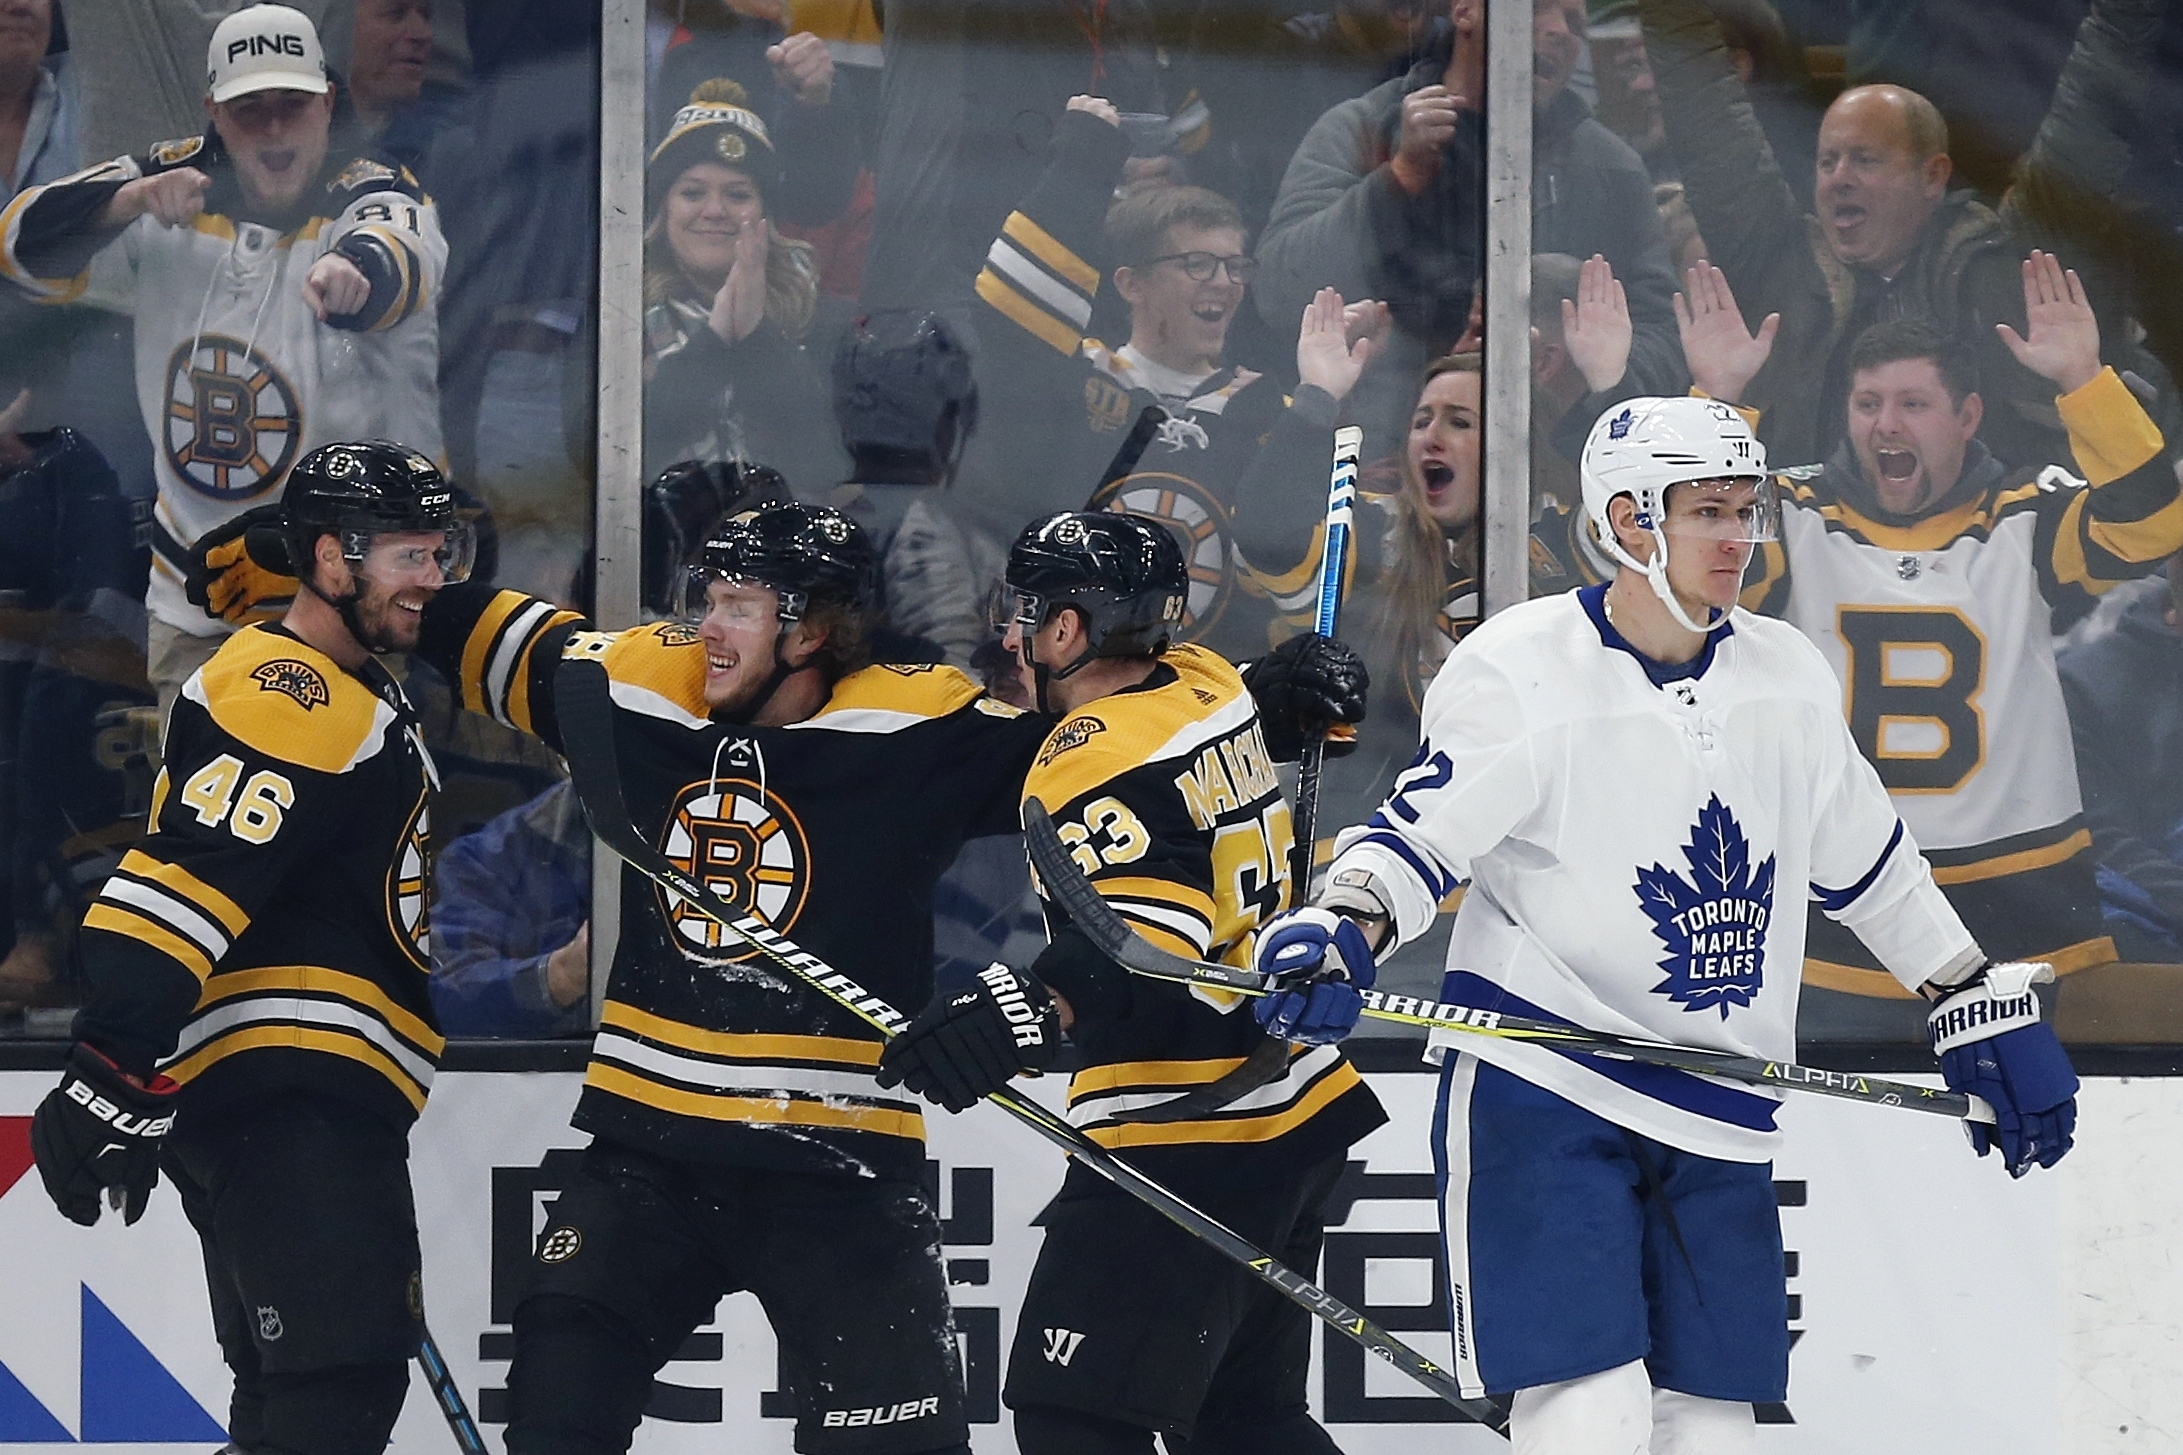 Krejci moves up Bruins’ scoring list in 6-3 win over Leafs